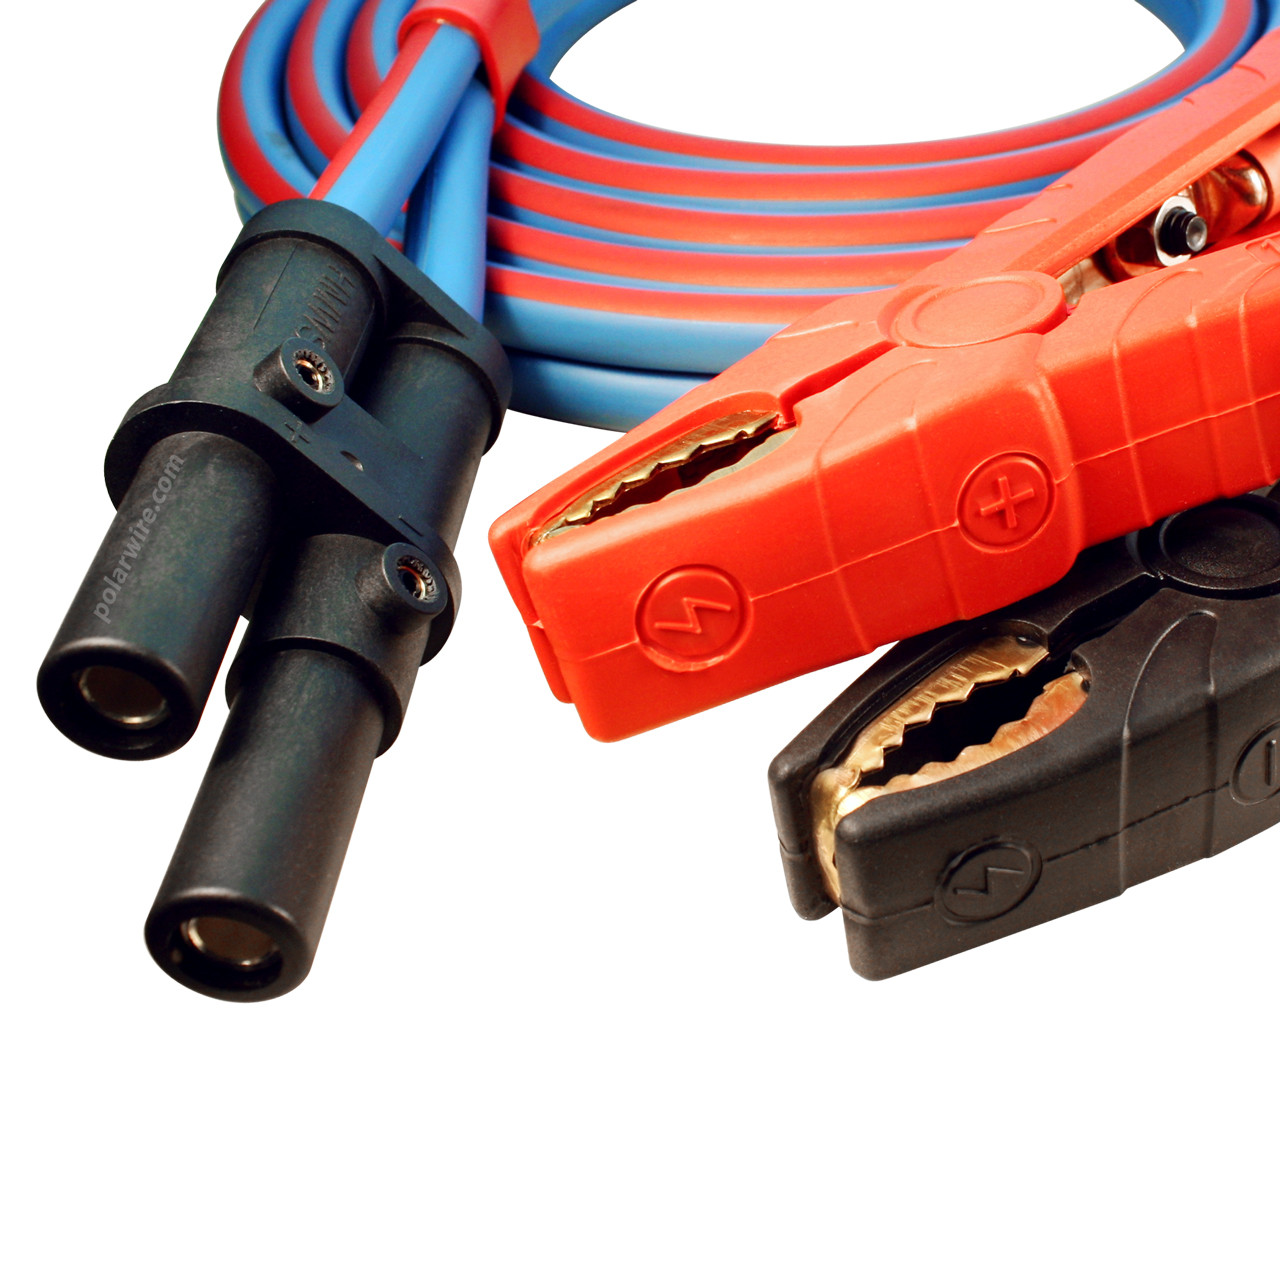 Polar Wire makes the best jumper cables available anywhere! 1/0 gauge, 15 foot J-1283 heavy duty caterpillar jump start cable, top quality alternative to Caterpillar 9S-3664 cables